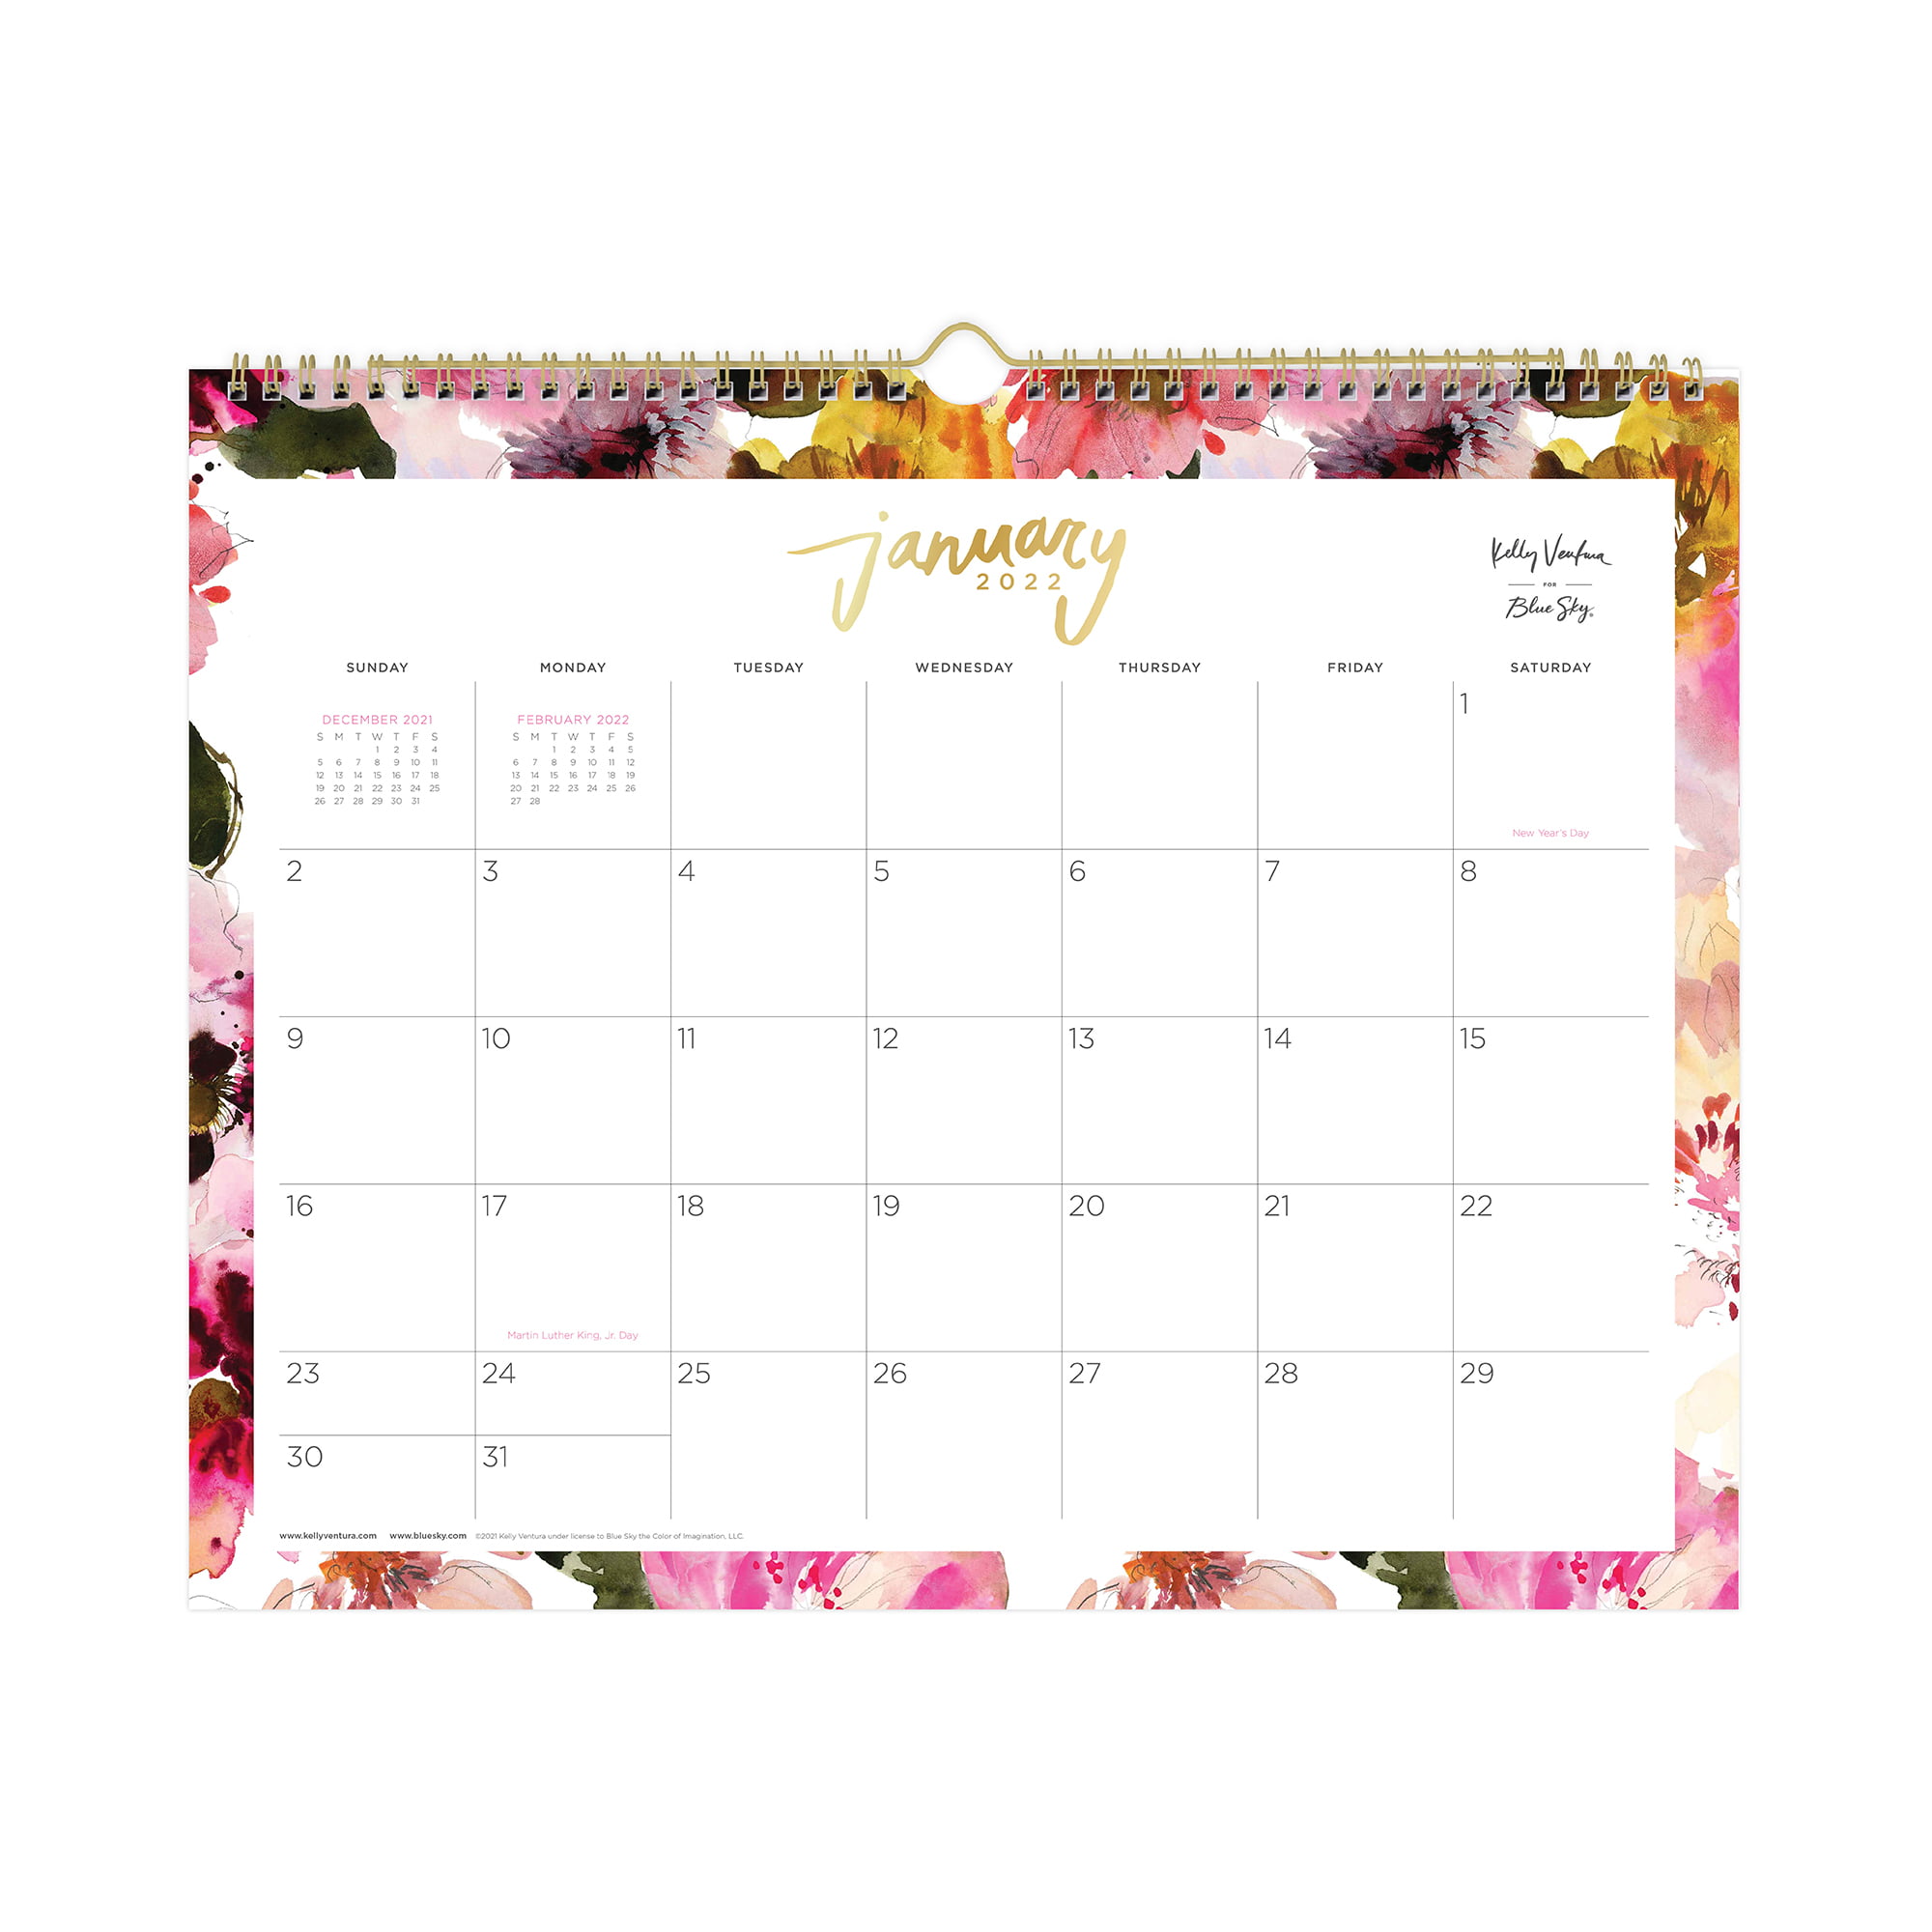 My Family Planner 2020 Square Wall Calendar by Browntrout FREE POST 